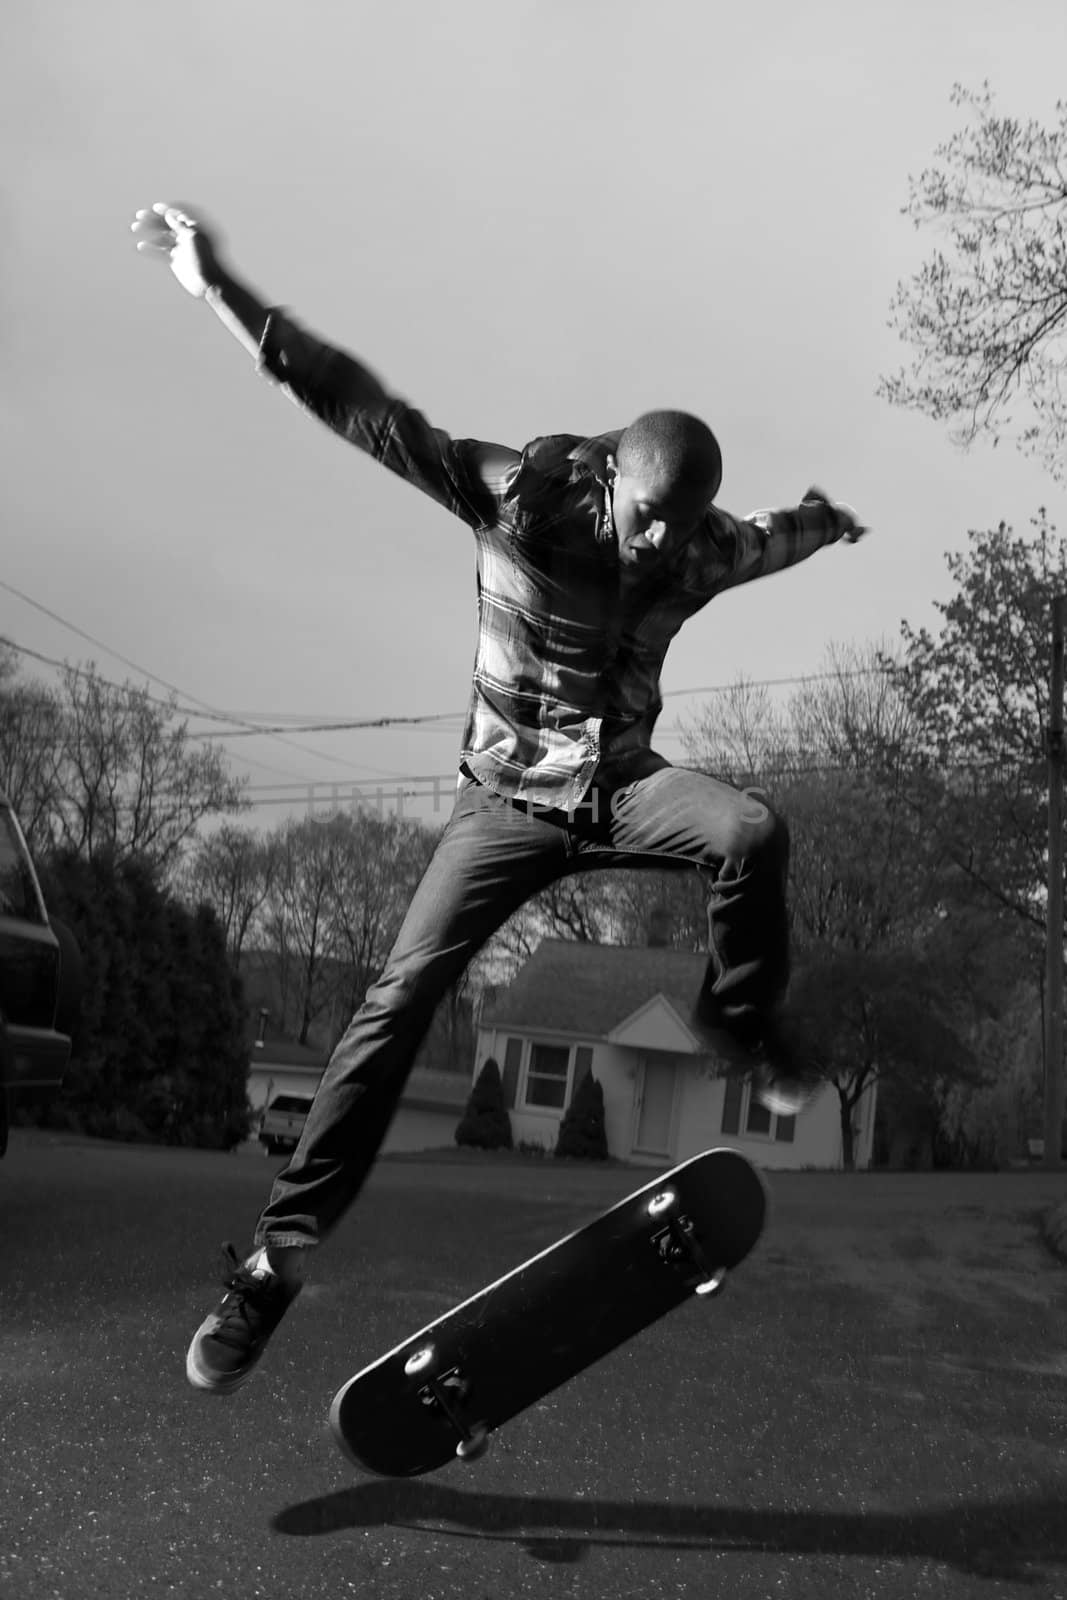 A skateboarder performing jumps or ollies on asphalt.  Slight motion blur showing the movement on the arms and legs.